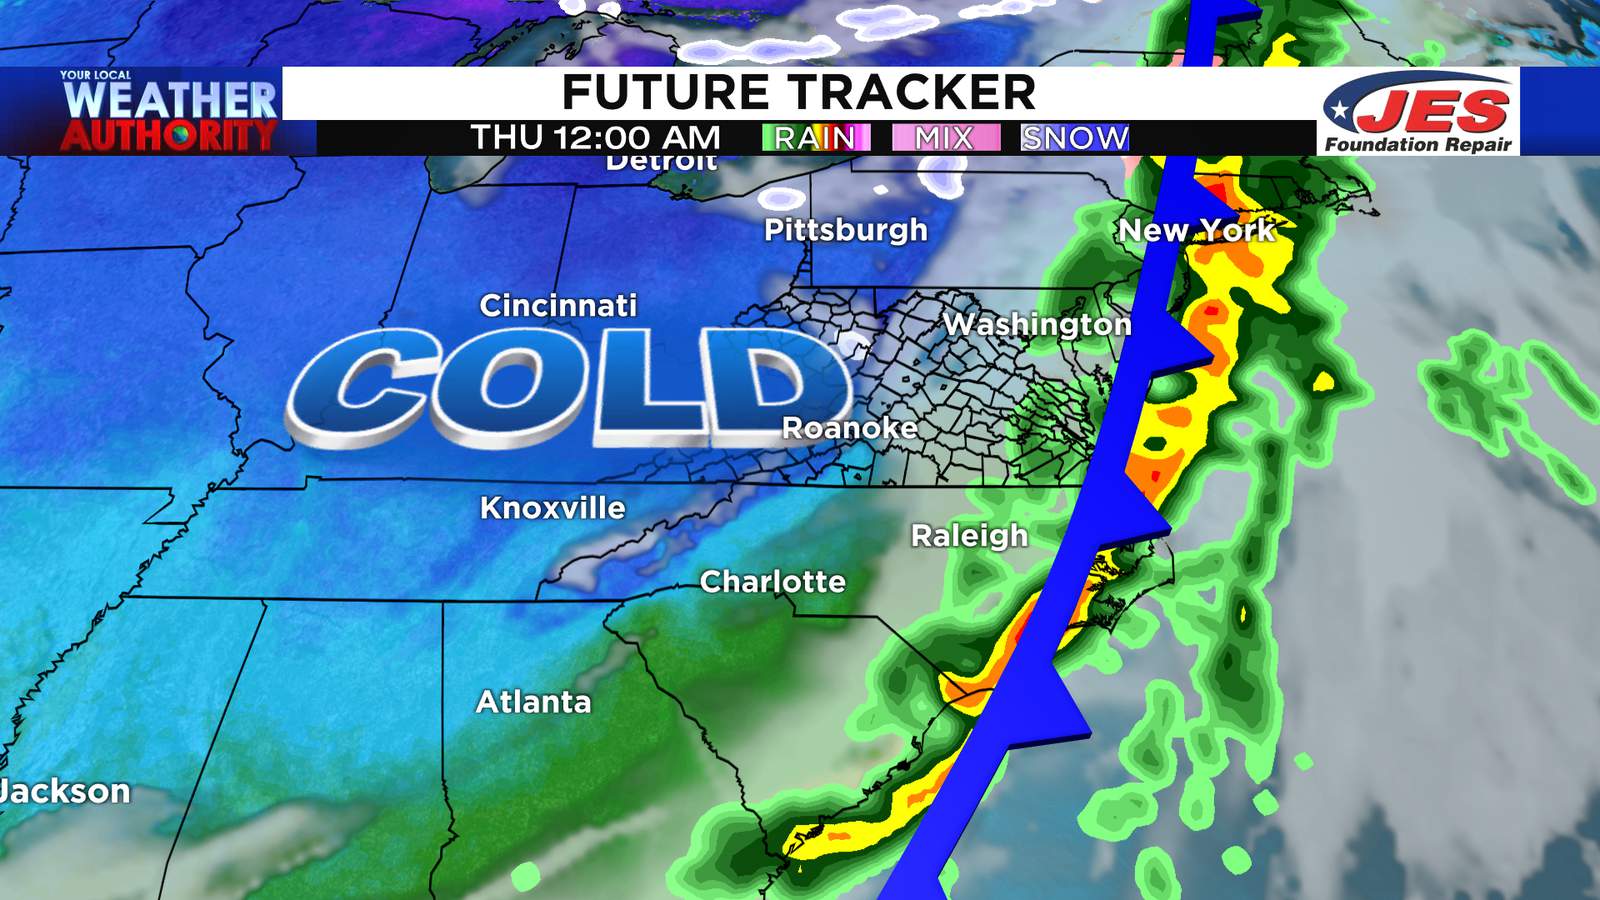 Tracking a mid-week cold front that takes us from spring to winter